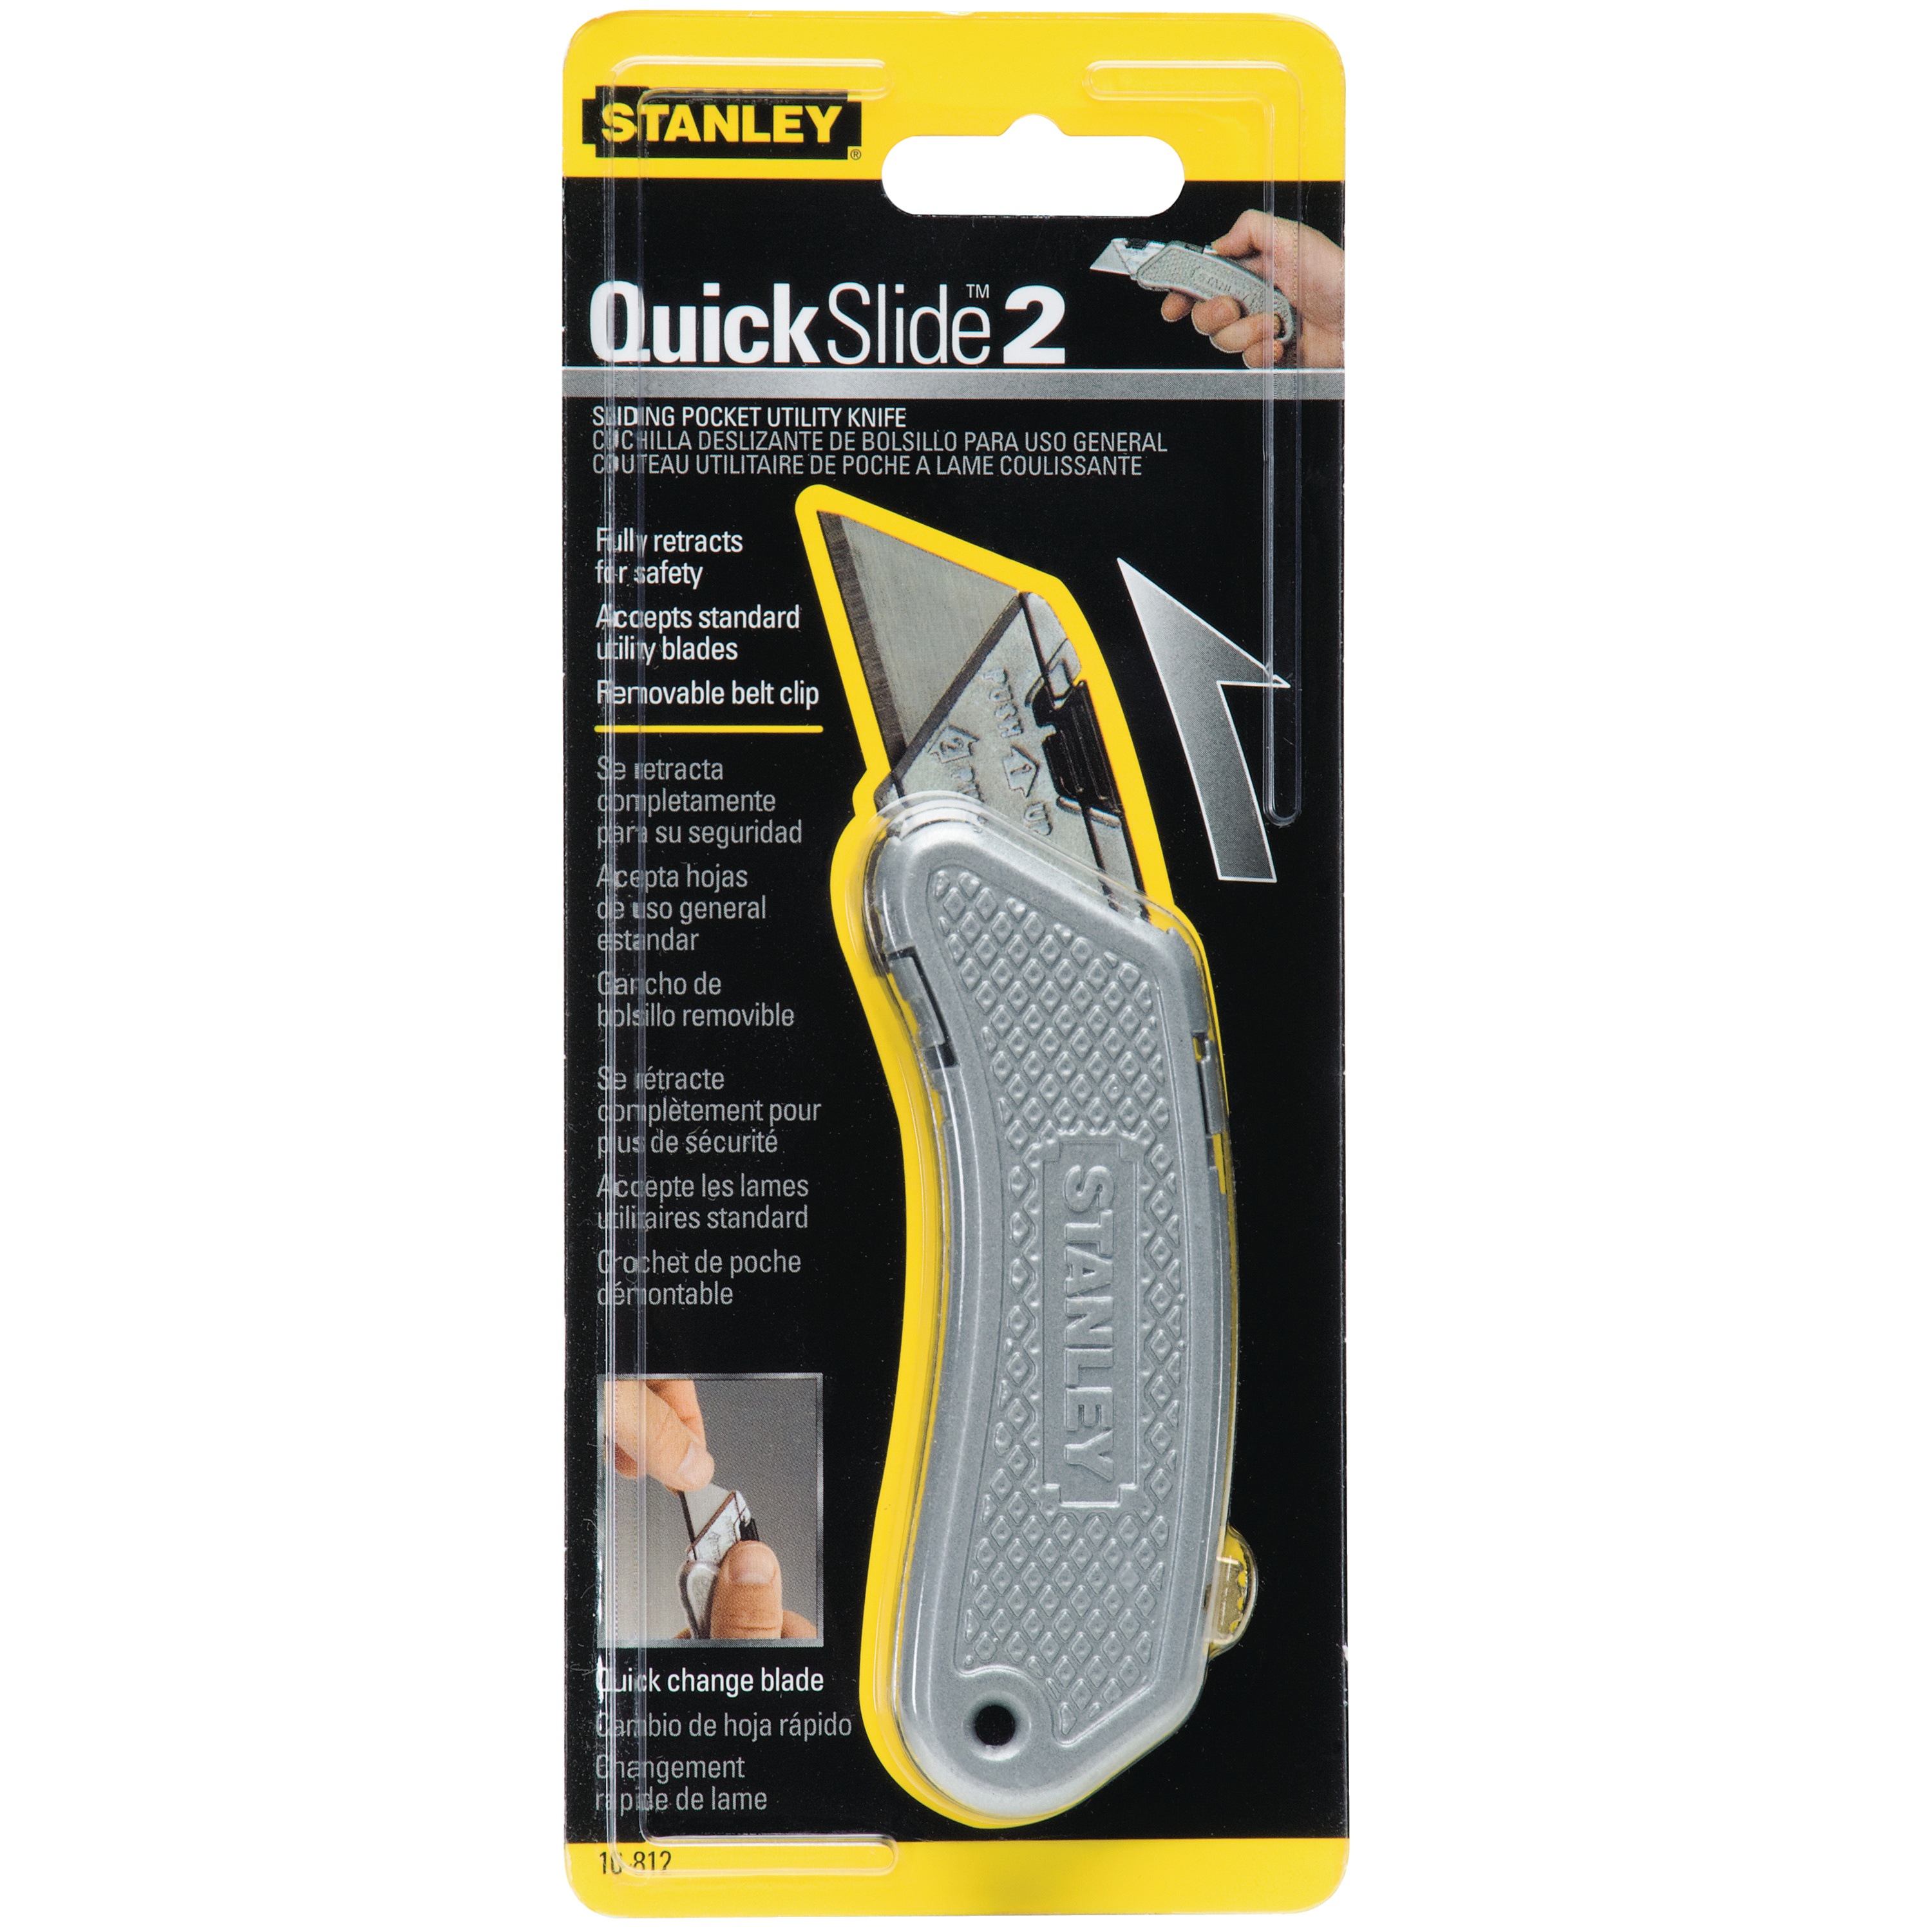 4-1/4 in QuickSlide® Knife - 10-812 | STANLEY Tools